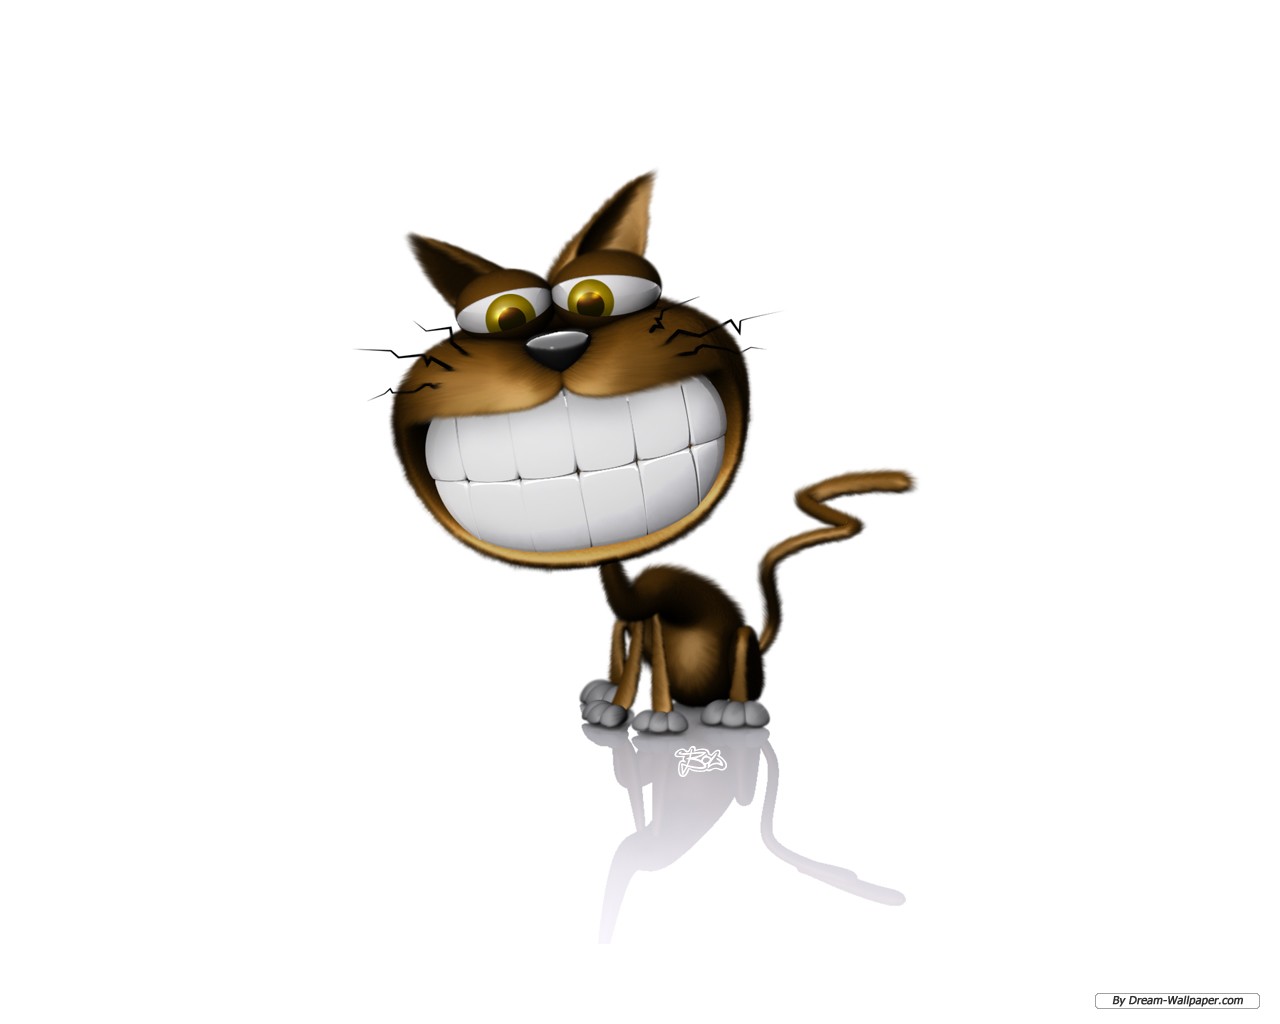 Funny Cartoon Animal Wallpapers 7821 Hd Wallpapers in Funny   Imagesci